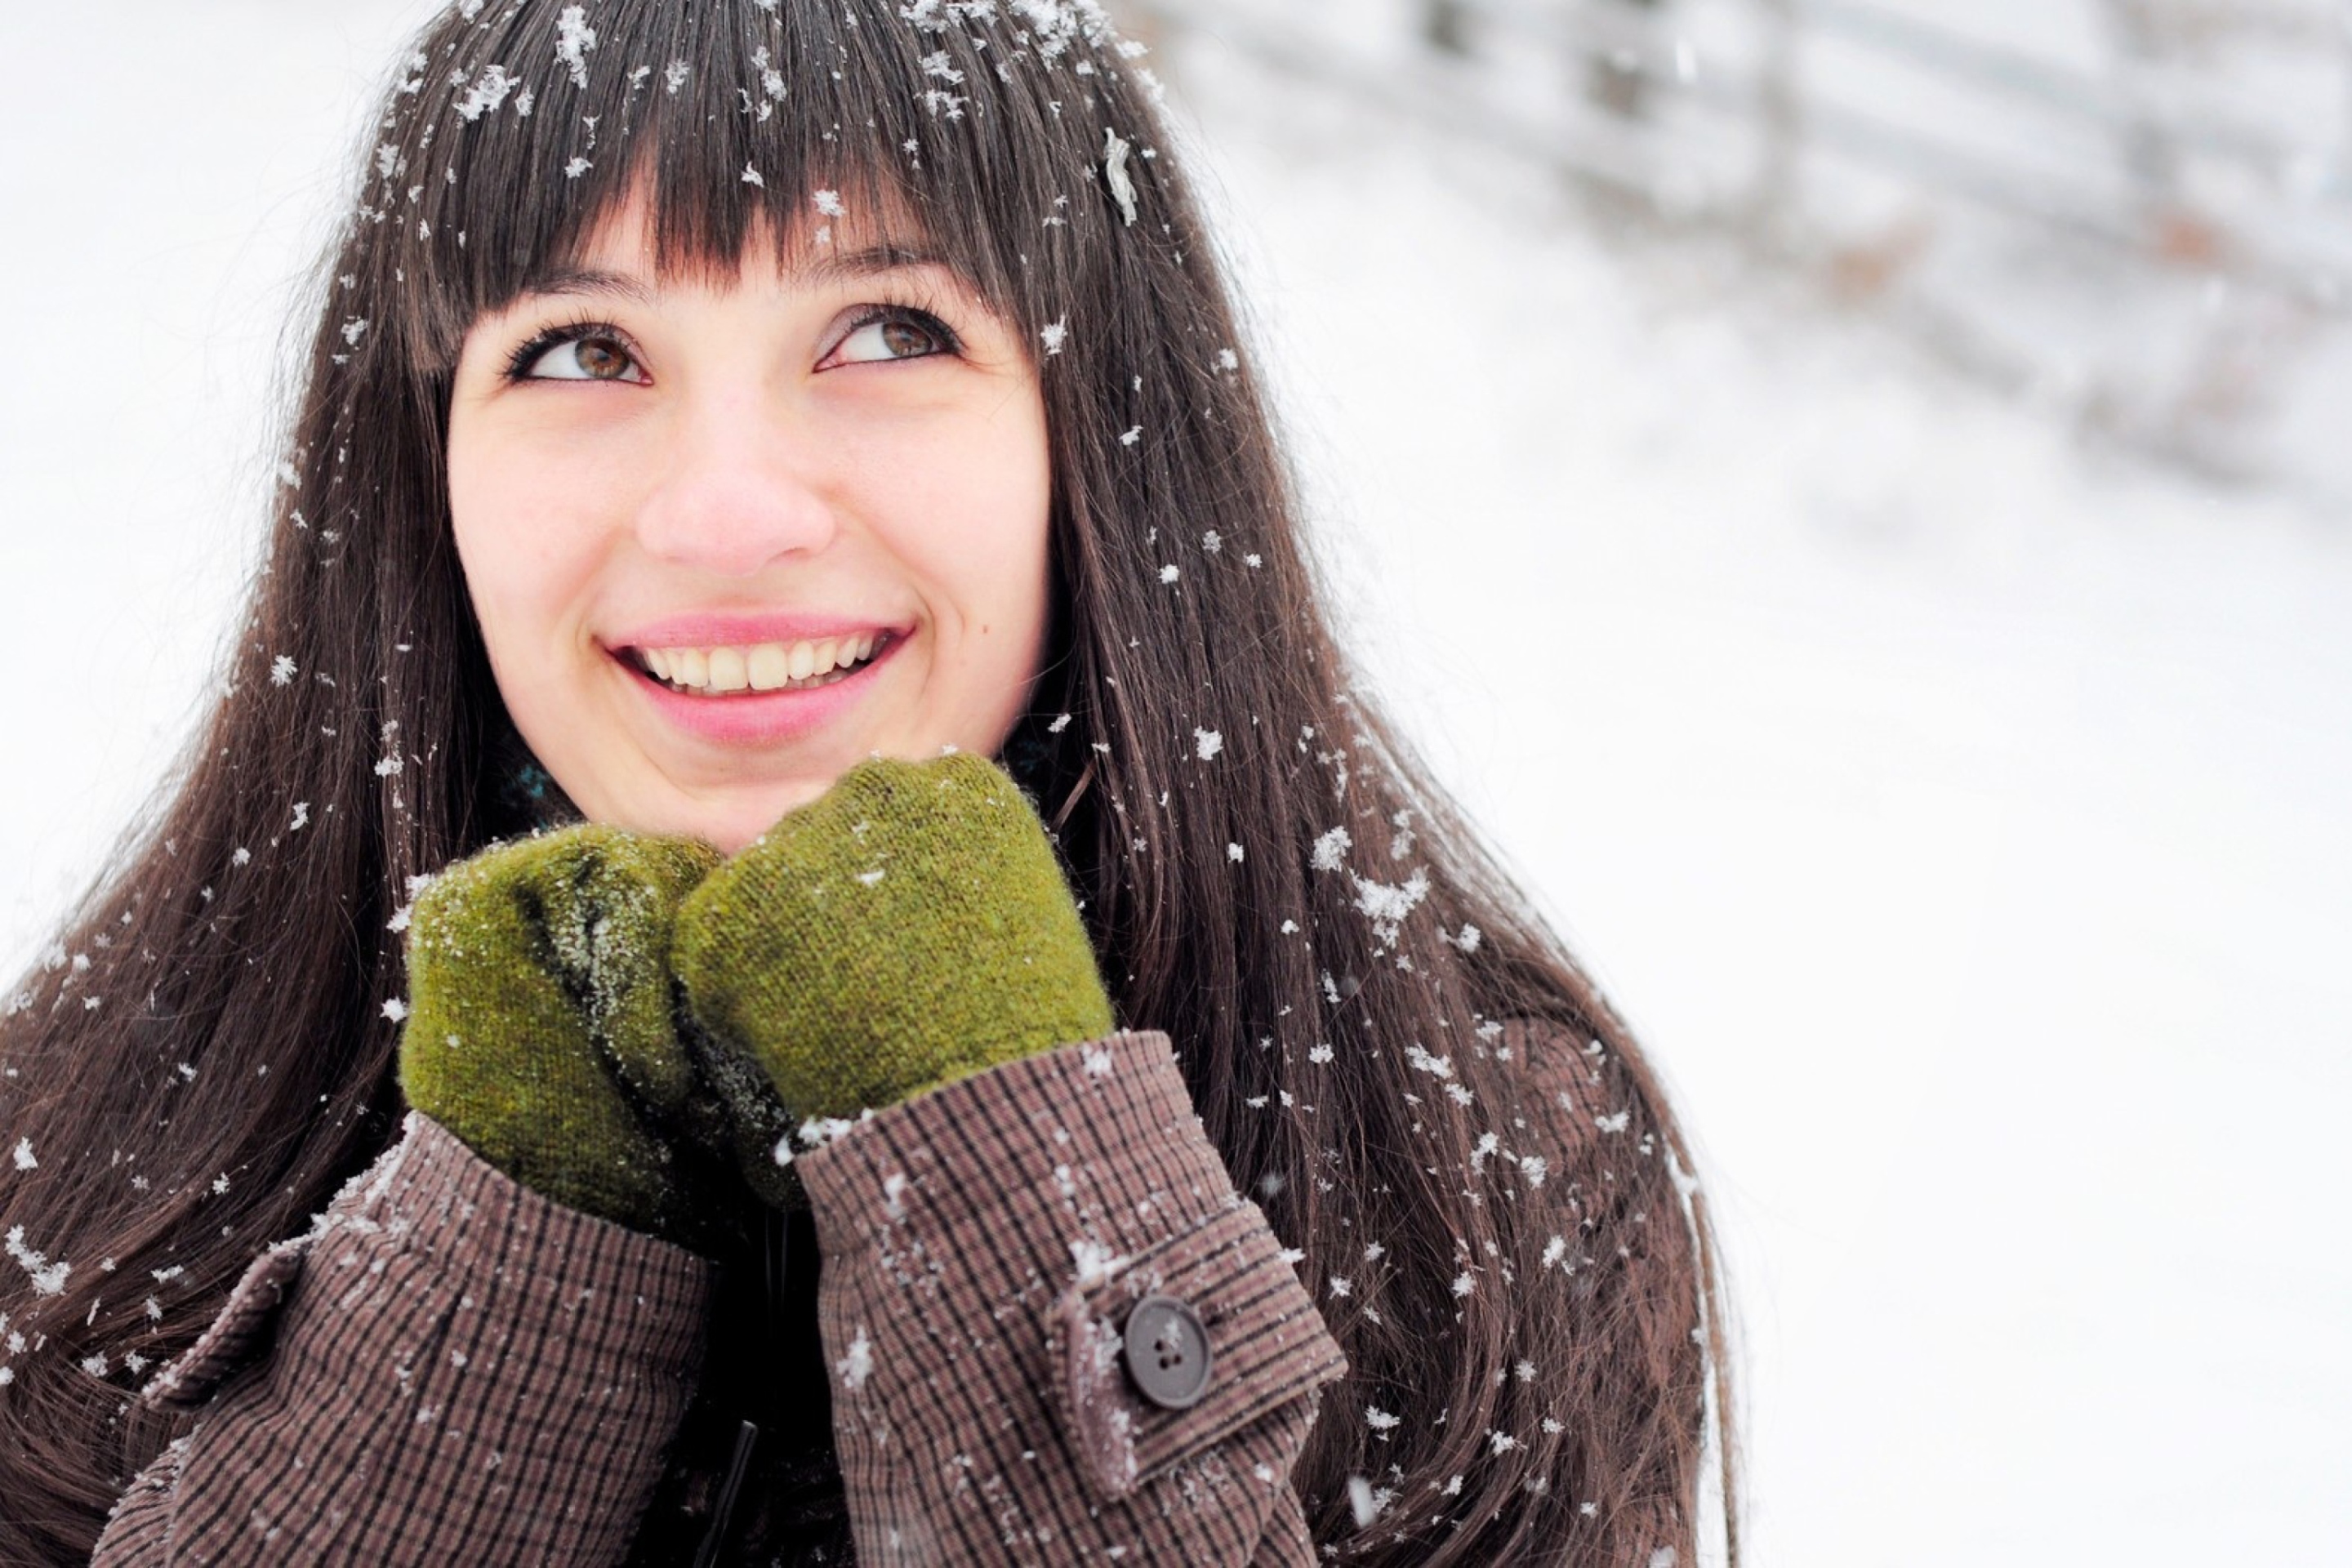 Обои Brunette With Green Gloves In Snow 2880x1920